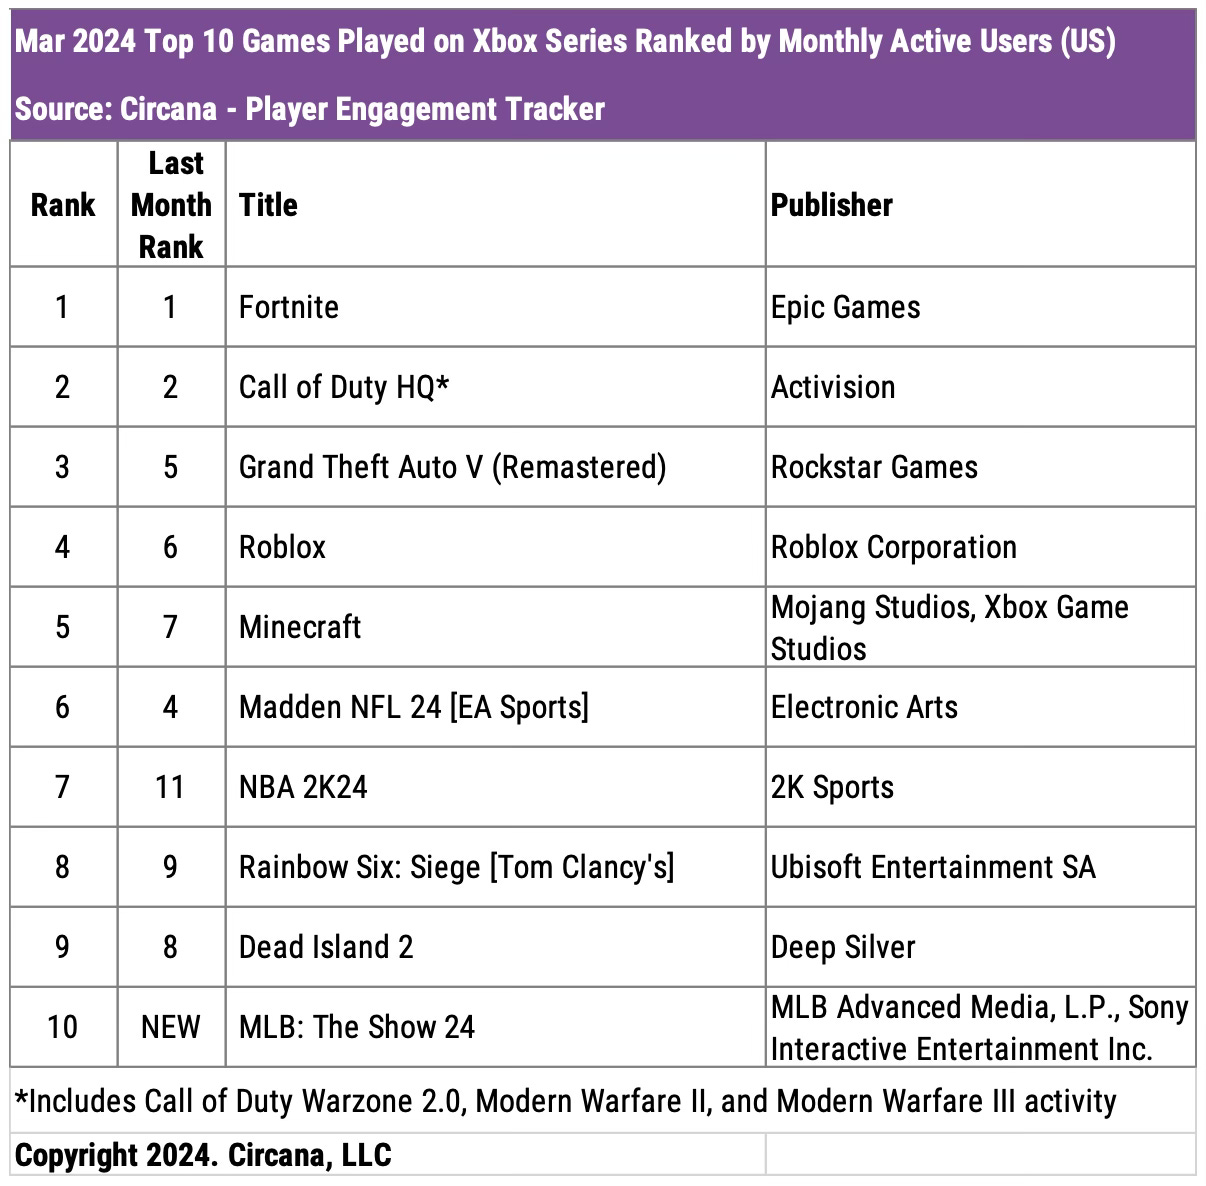 Chart showing the top 10 games played on Xbox Series in March 2024 when ranked by monthly active users in the U.S.